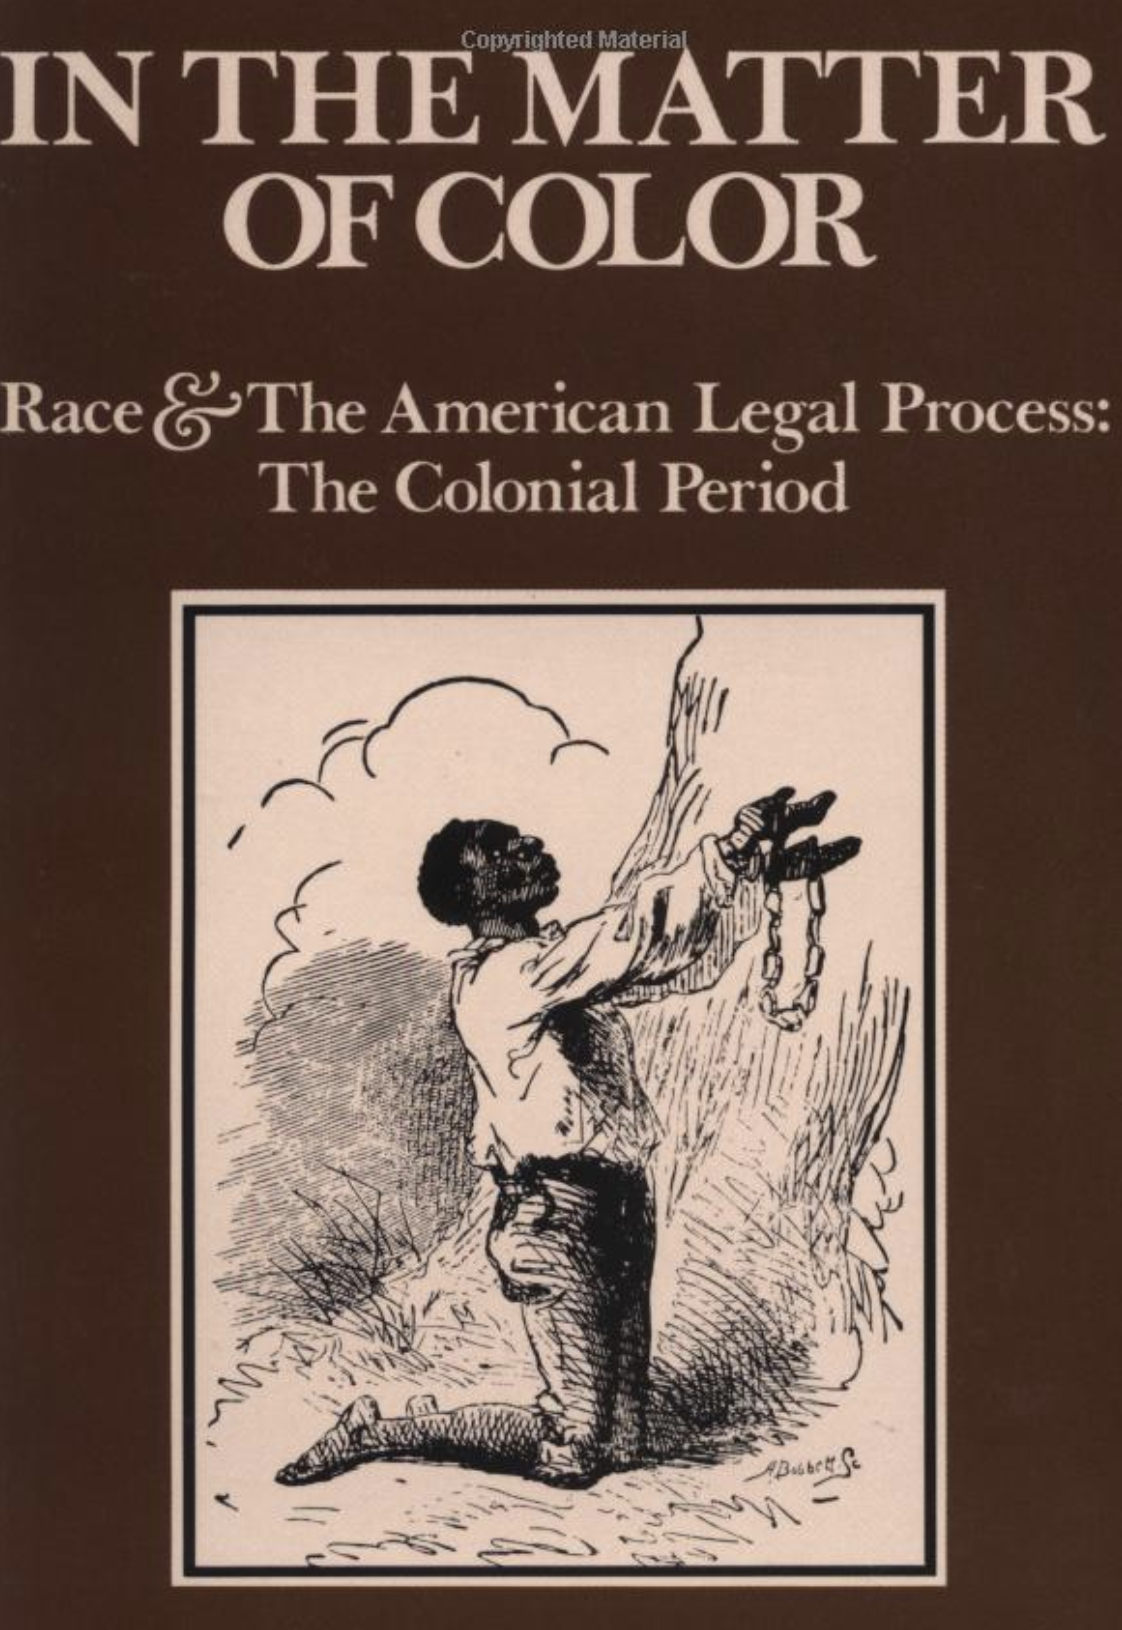 In the Matter of Color: Race and the American Legal Process: The Colonial Period 4TH Edition